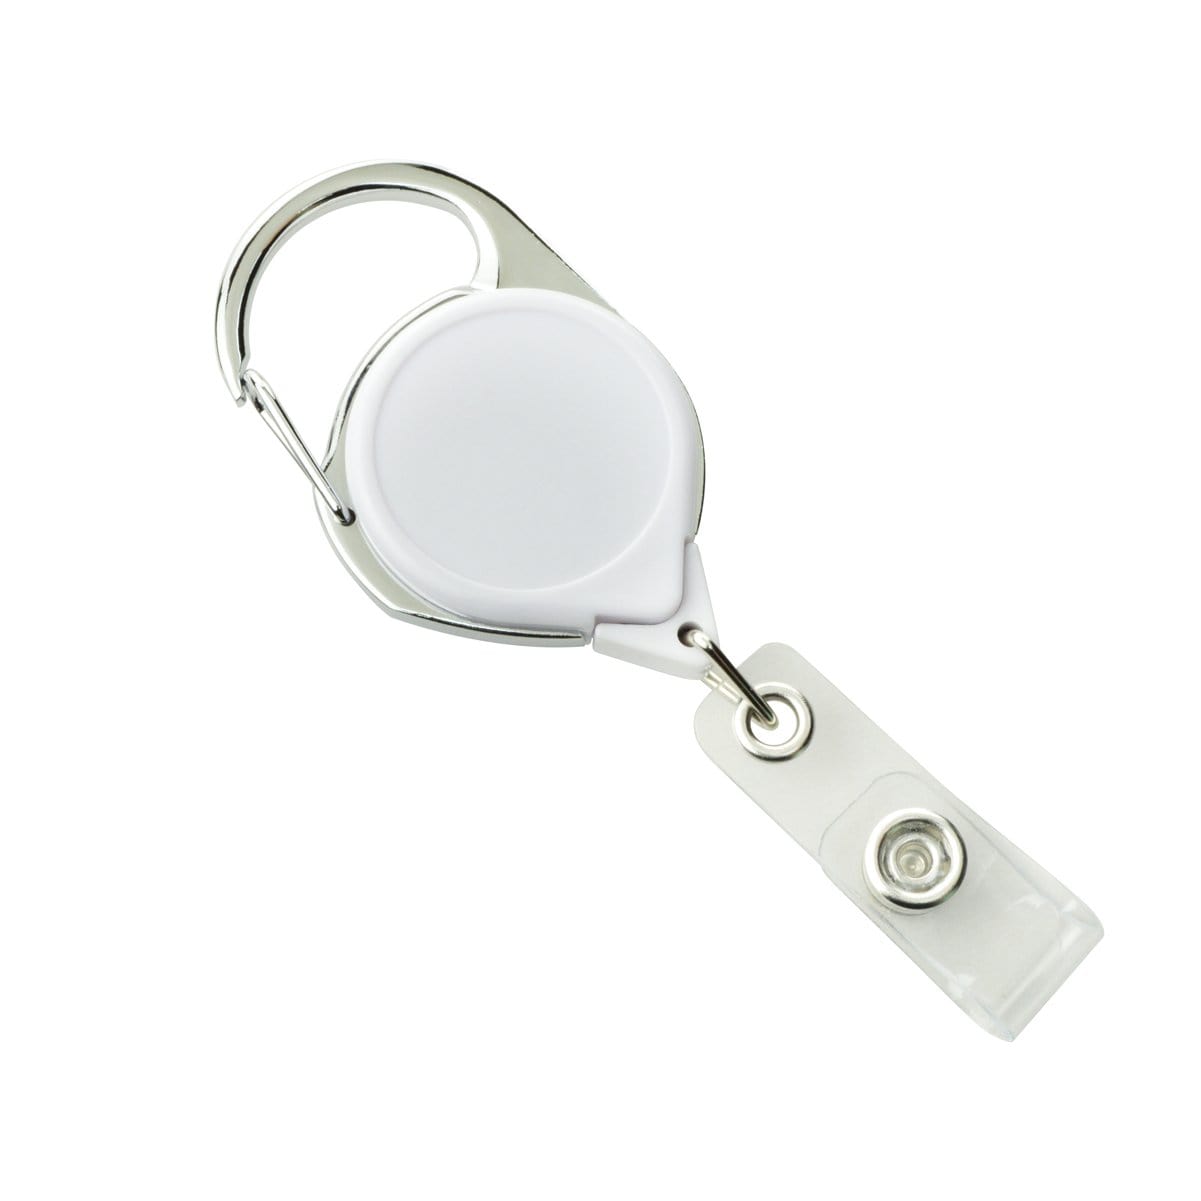 Shop for and Buy Carabiner Clip with Retractable Badge Holder